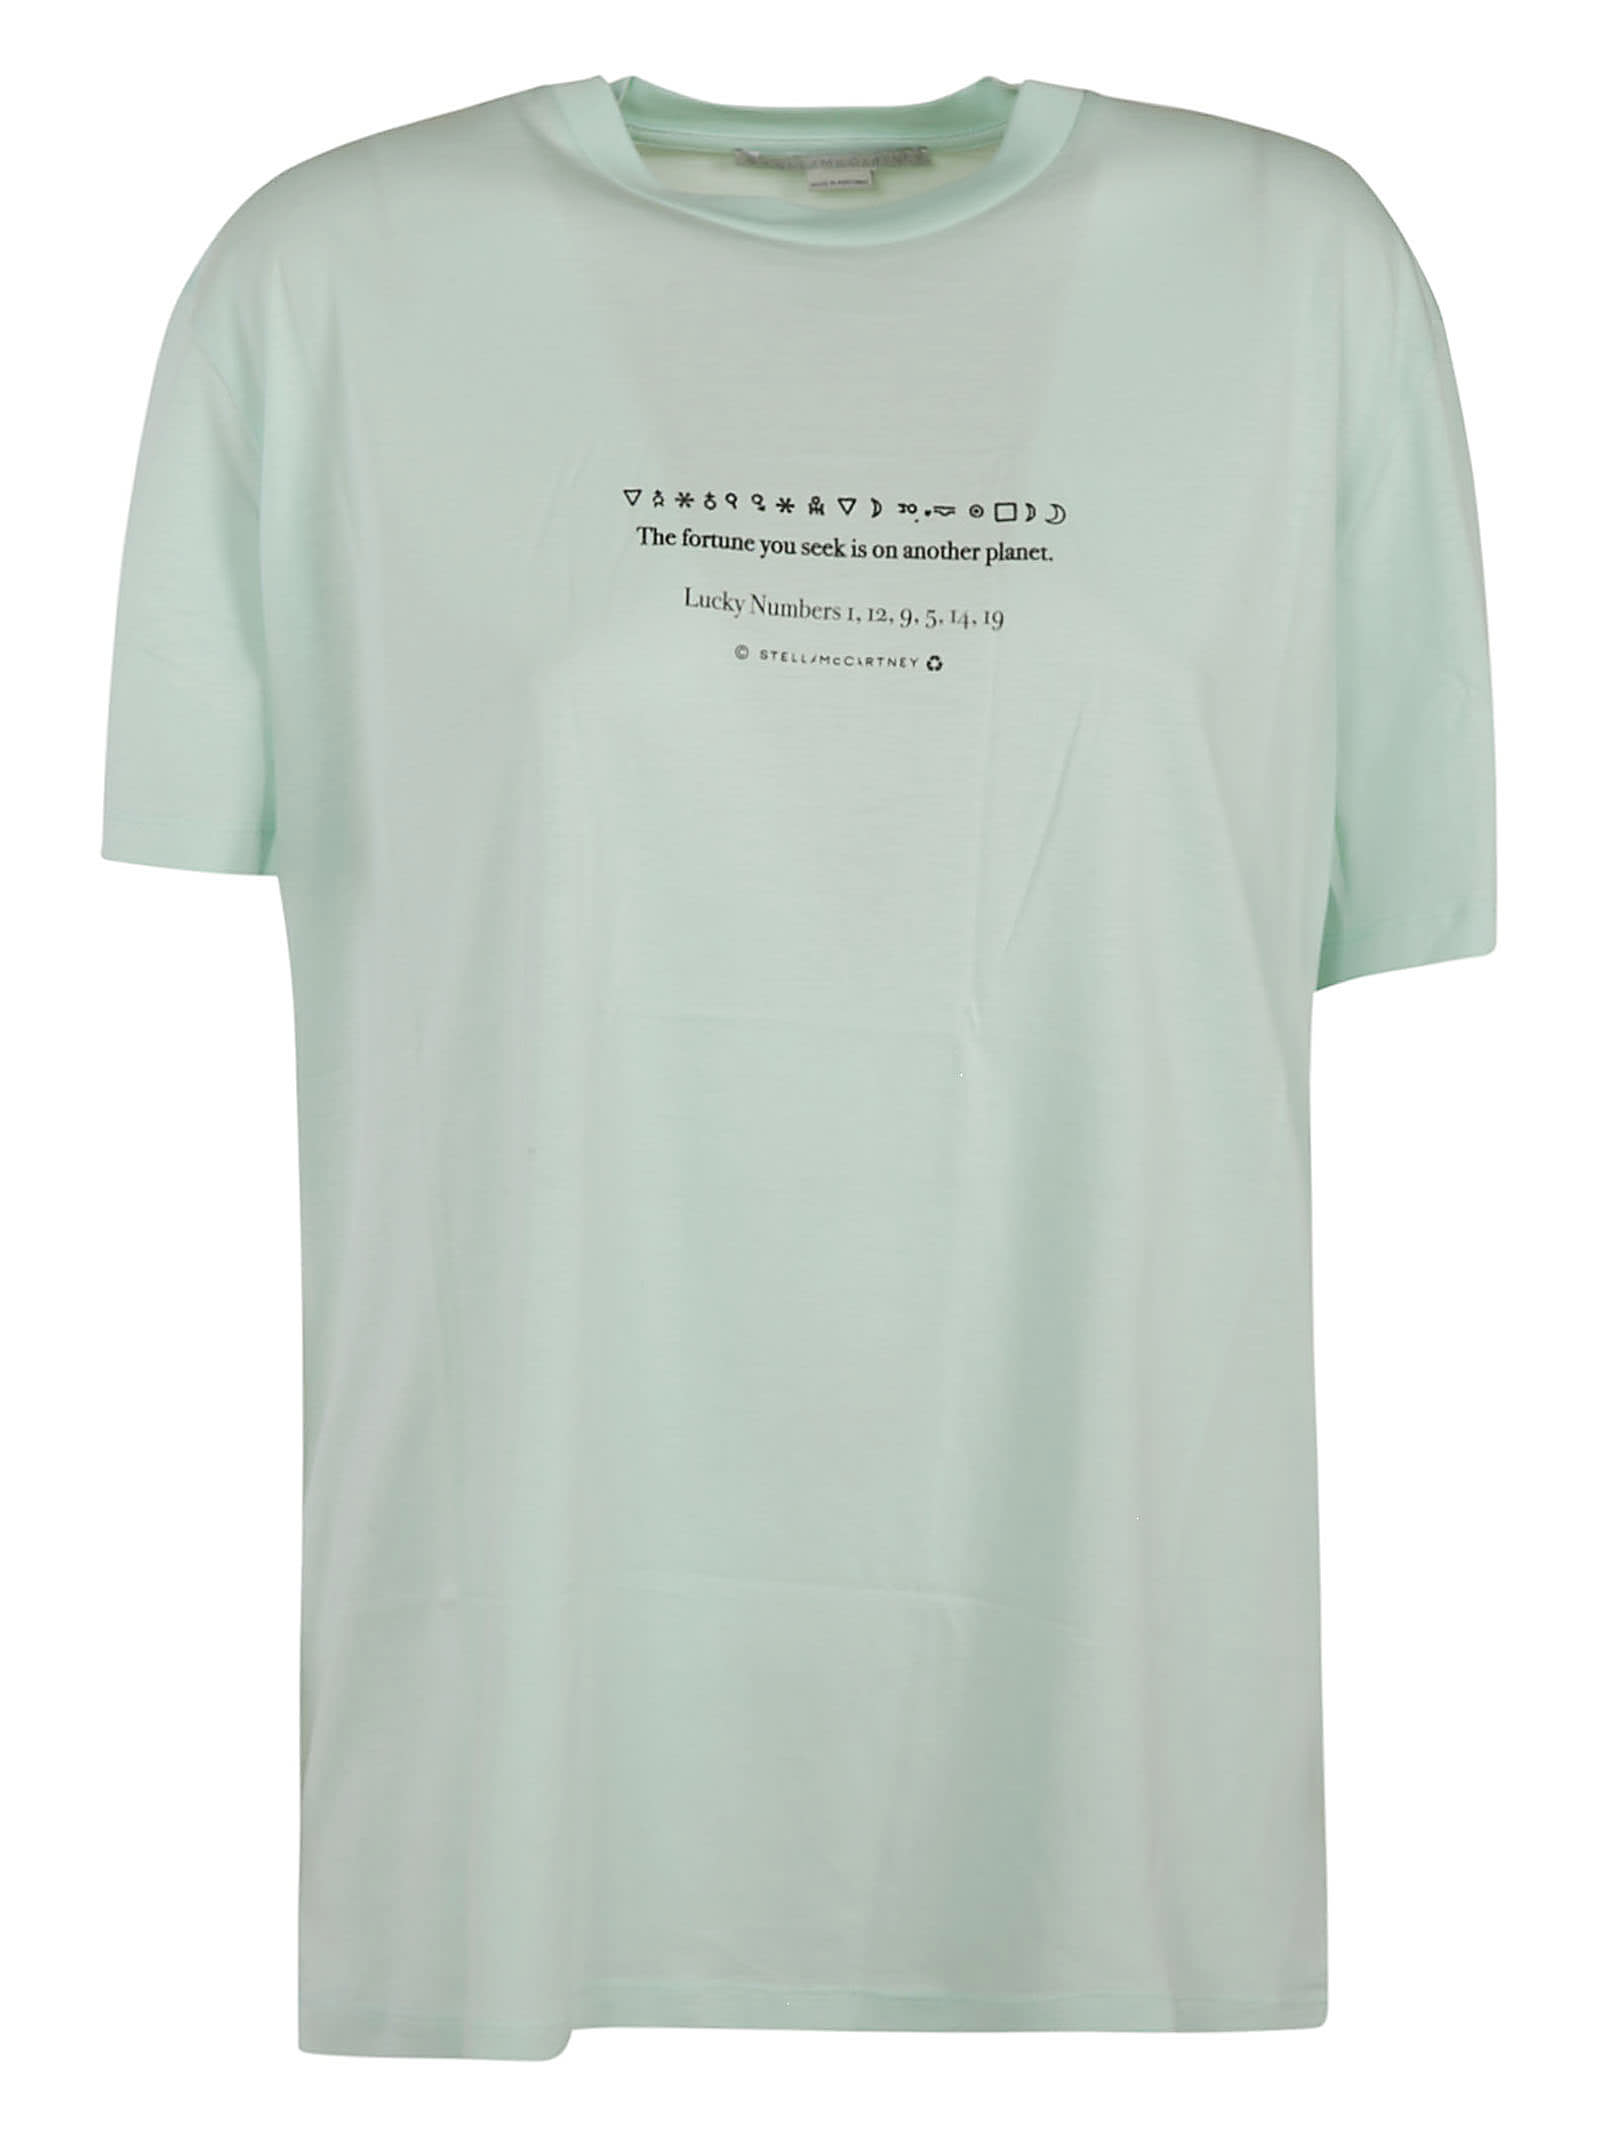 STELLA MCCARTNEY LUCKY NUMBERS T-SHIRT,381701SNW723902